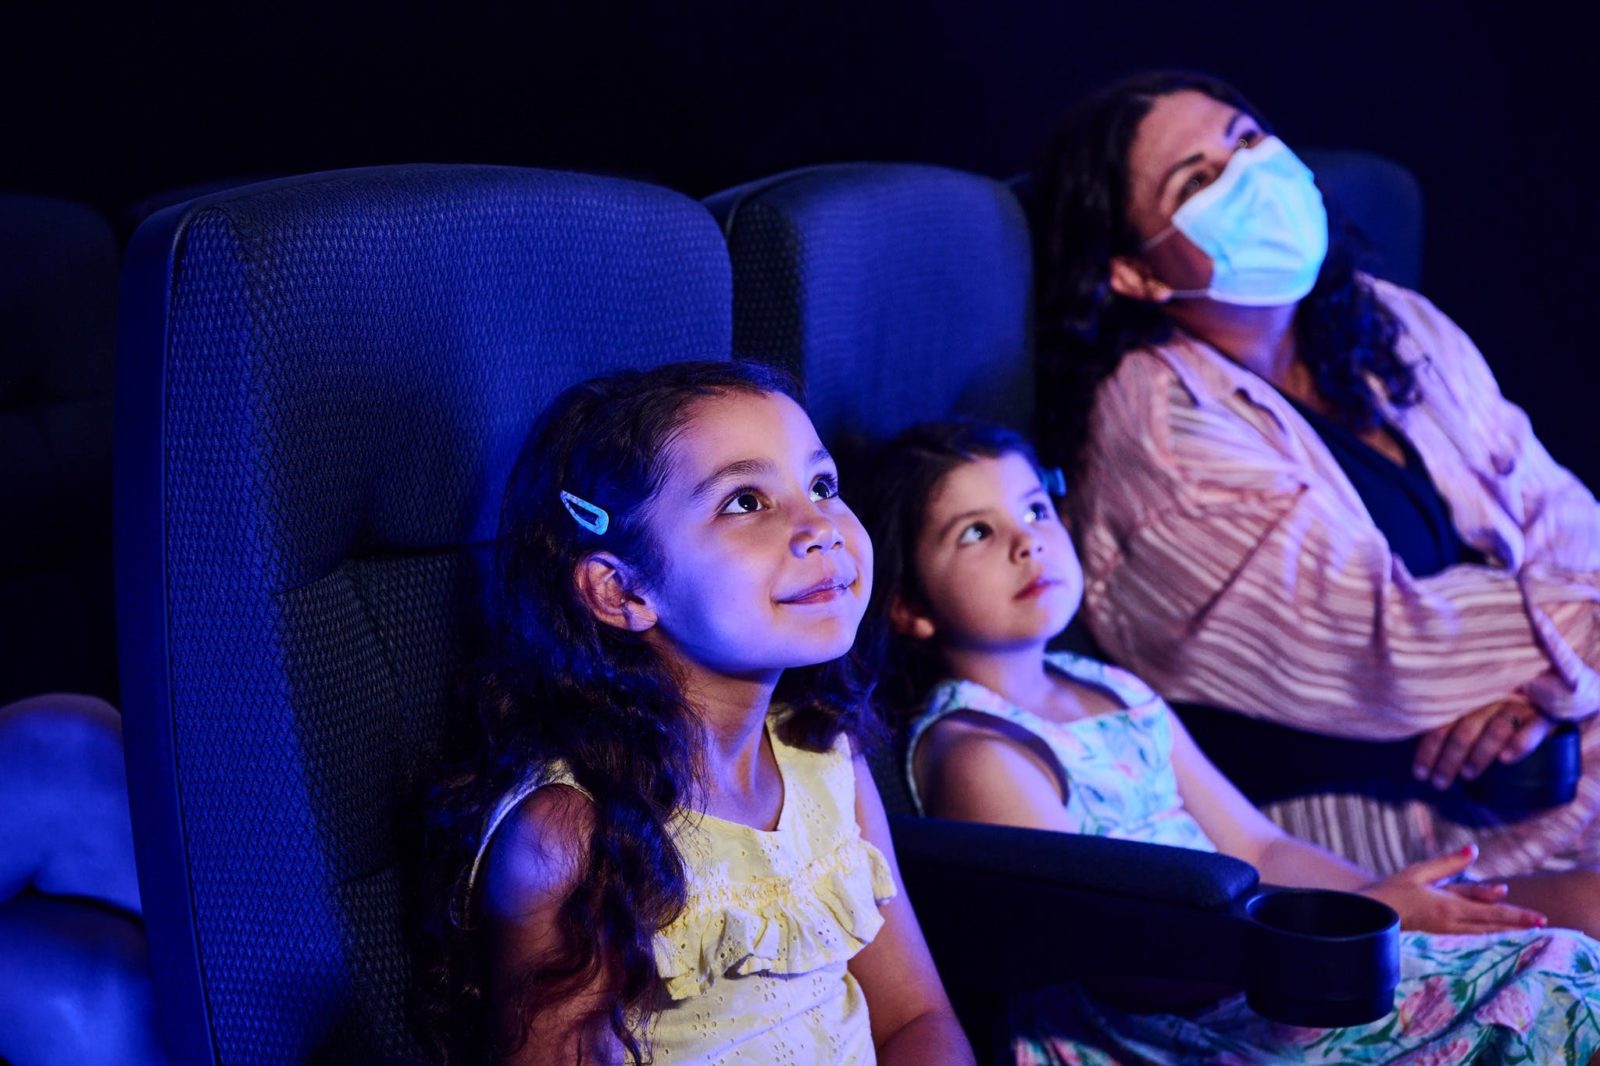 Two small girls and their mother watch the cinema experience, blue light filling the room